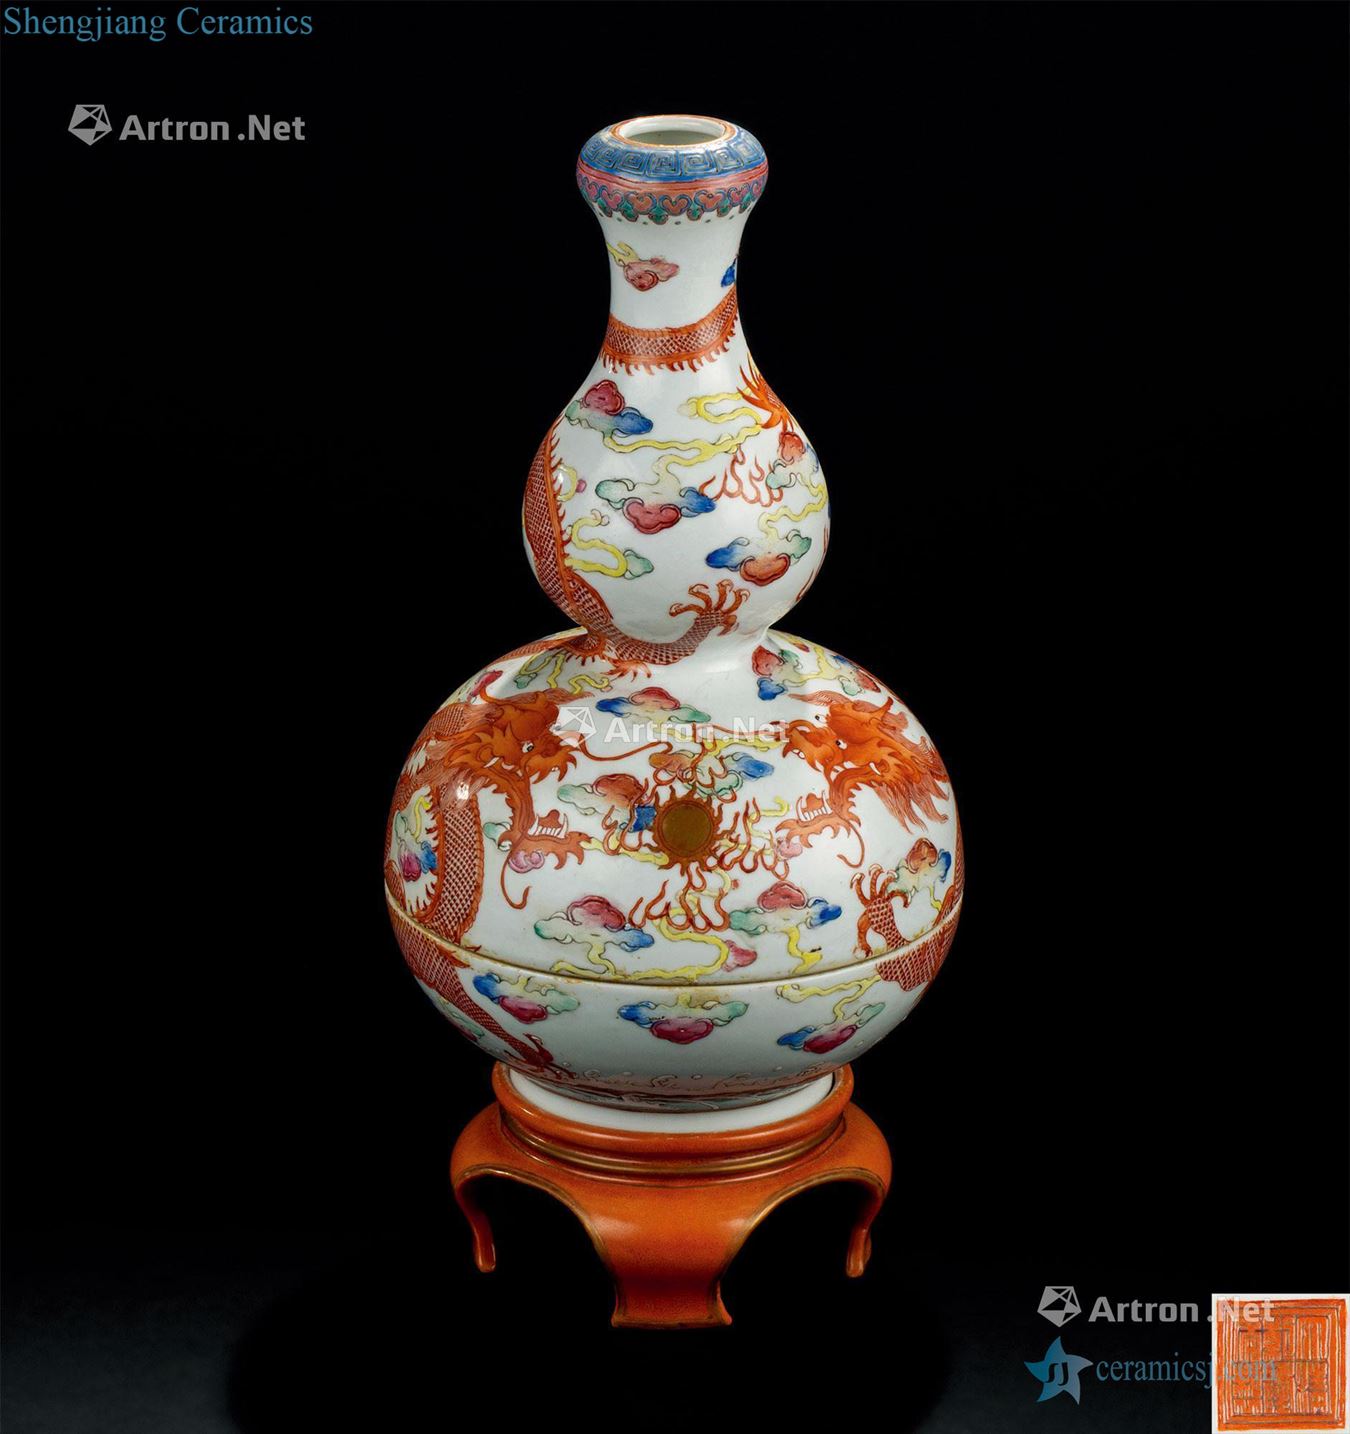 The late qing dynasty (1840-1911) pastel praised gourd bottle